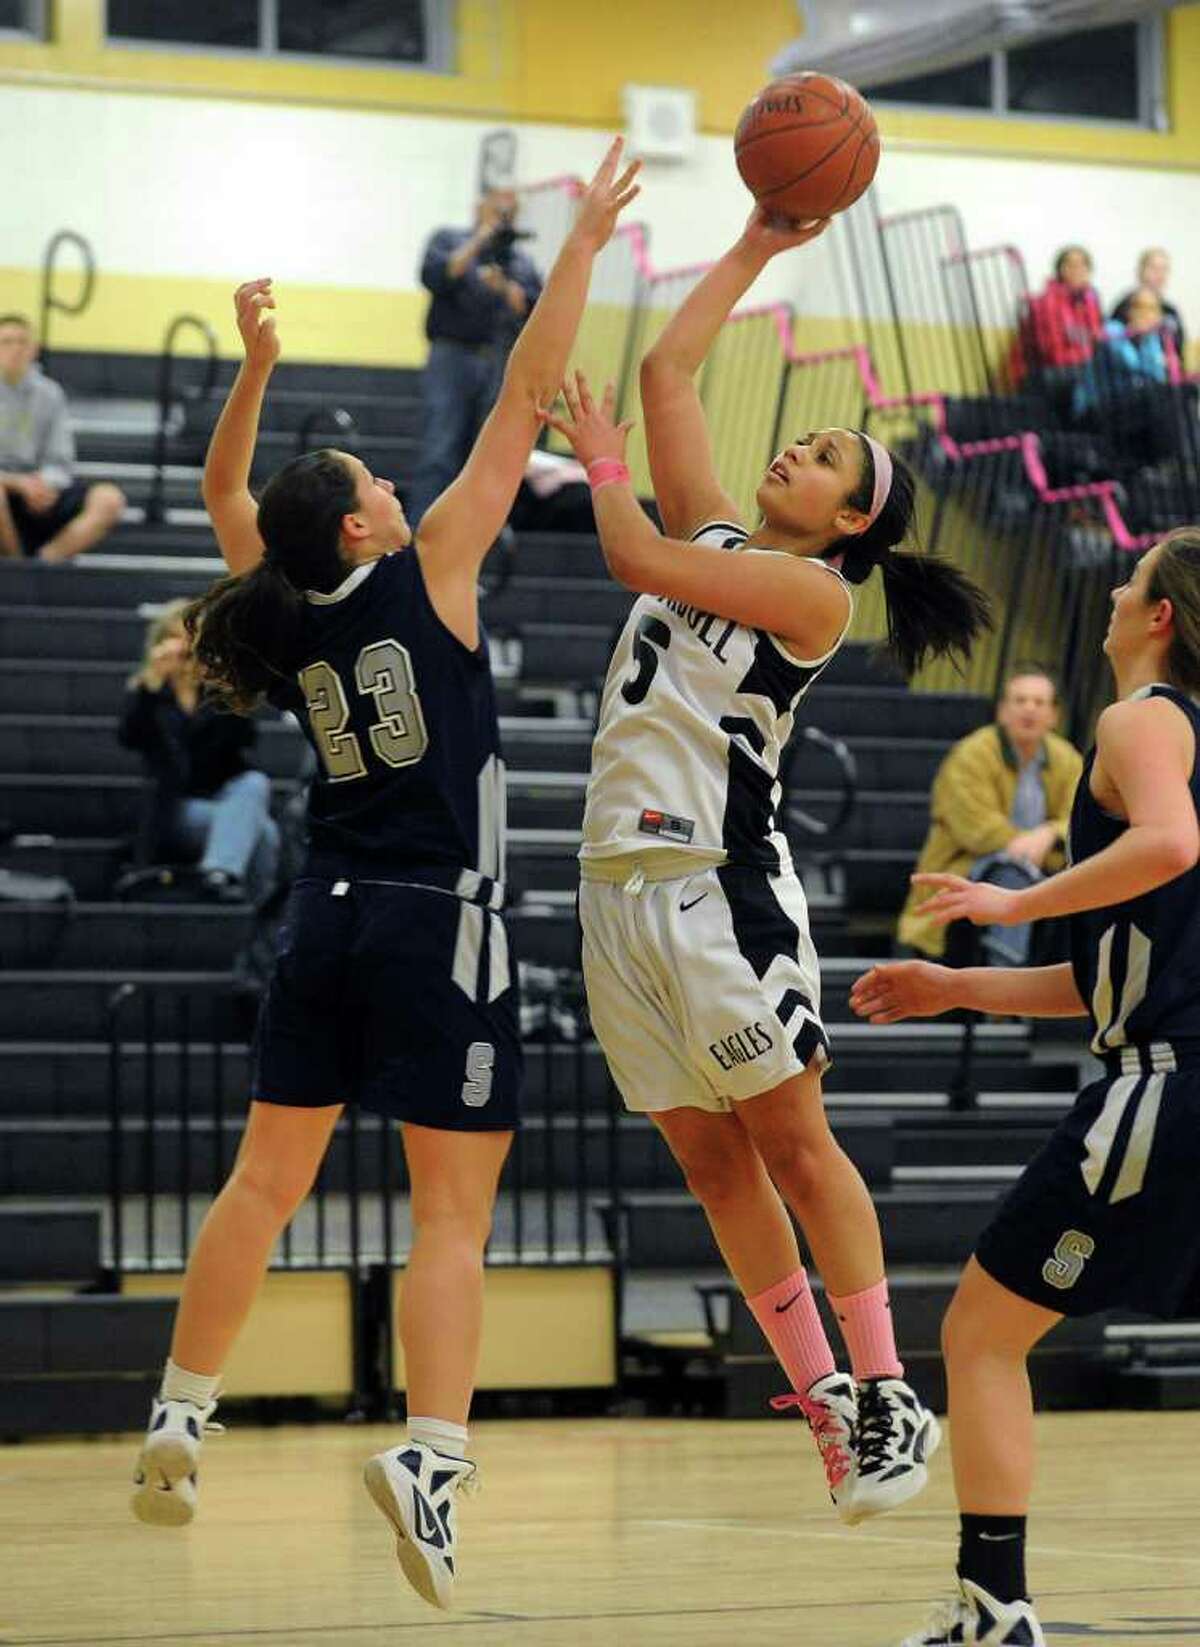 Trumbull's #5 Joyce Woolen, right, attempts a shot as Staples' #23 Sophie deBruijn defends, during girls basketball action in Trumbull, Conn. on Friday February 10, 2012.